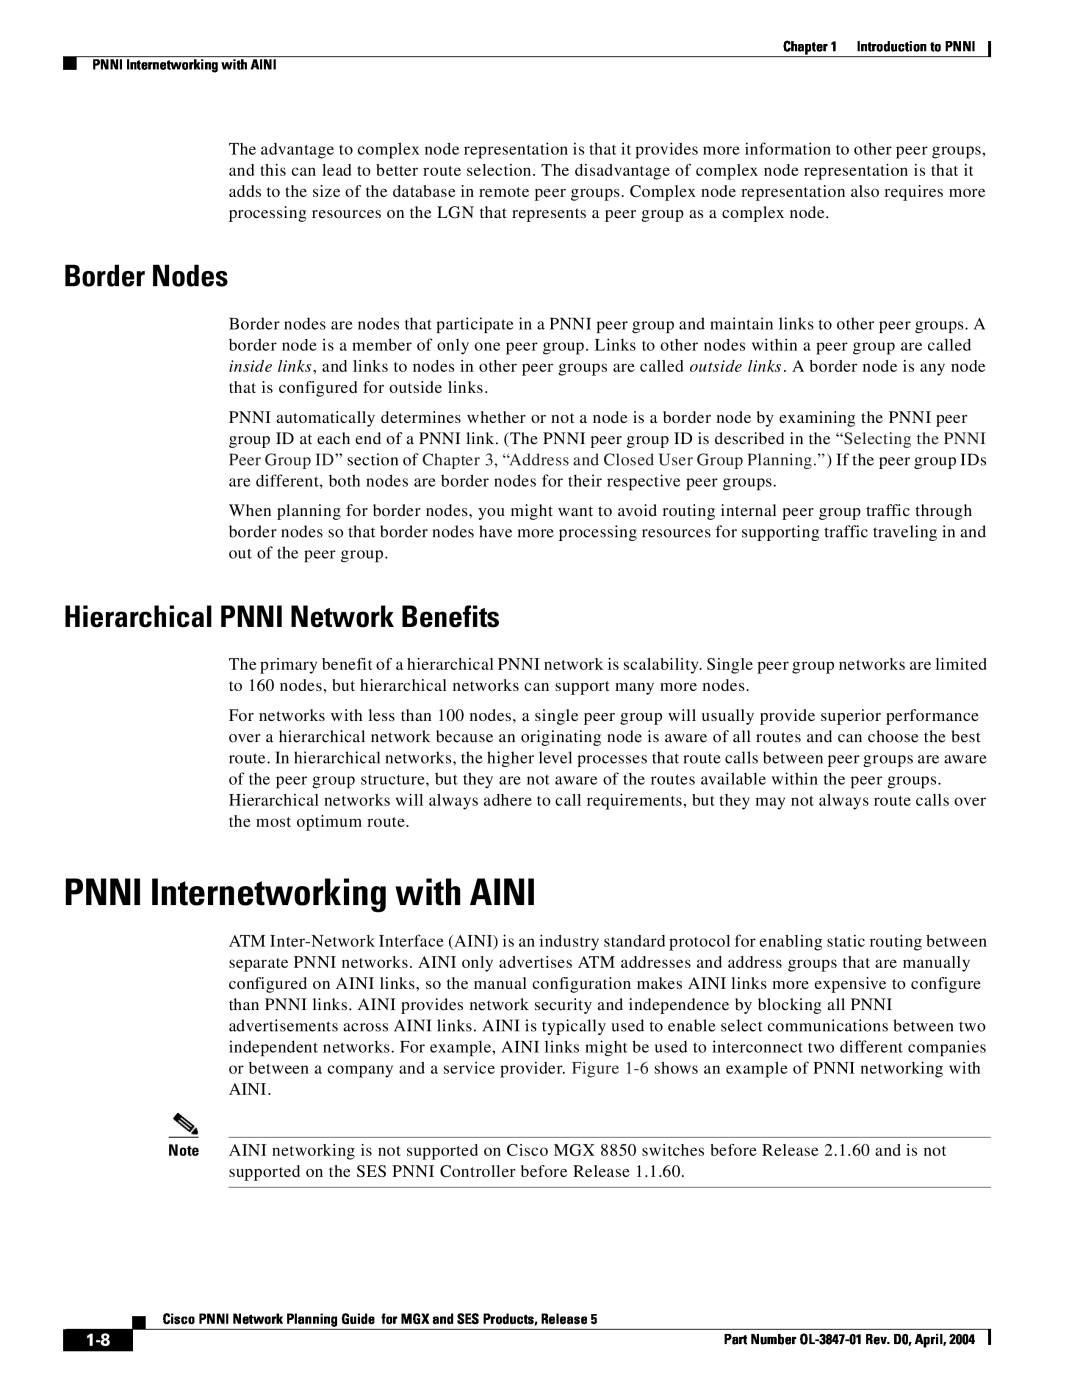 Cisco Systems Network Router manual PNNI Internetworking with AINI, Border Nodes, Hierarchical PNNI Network Benefits 